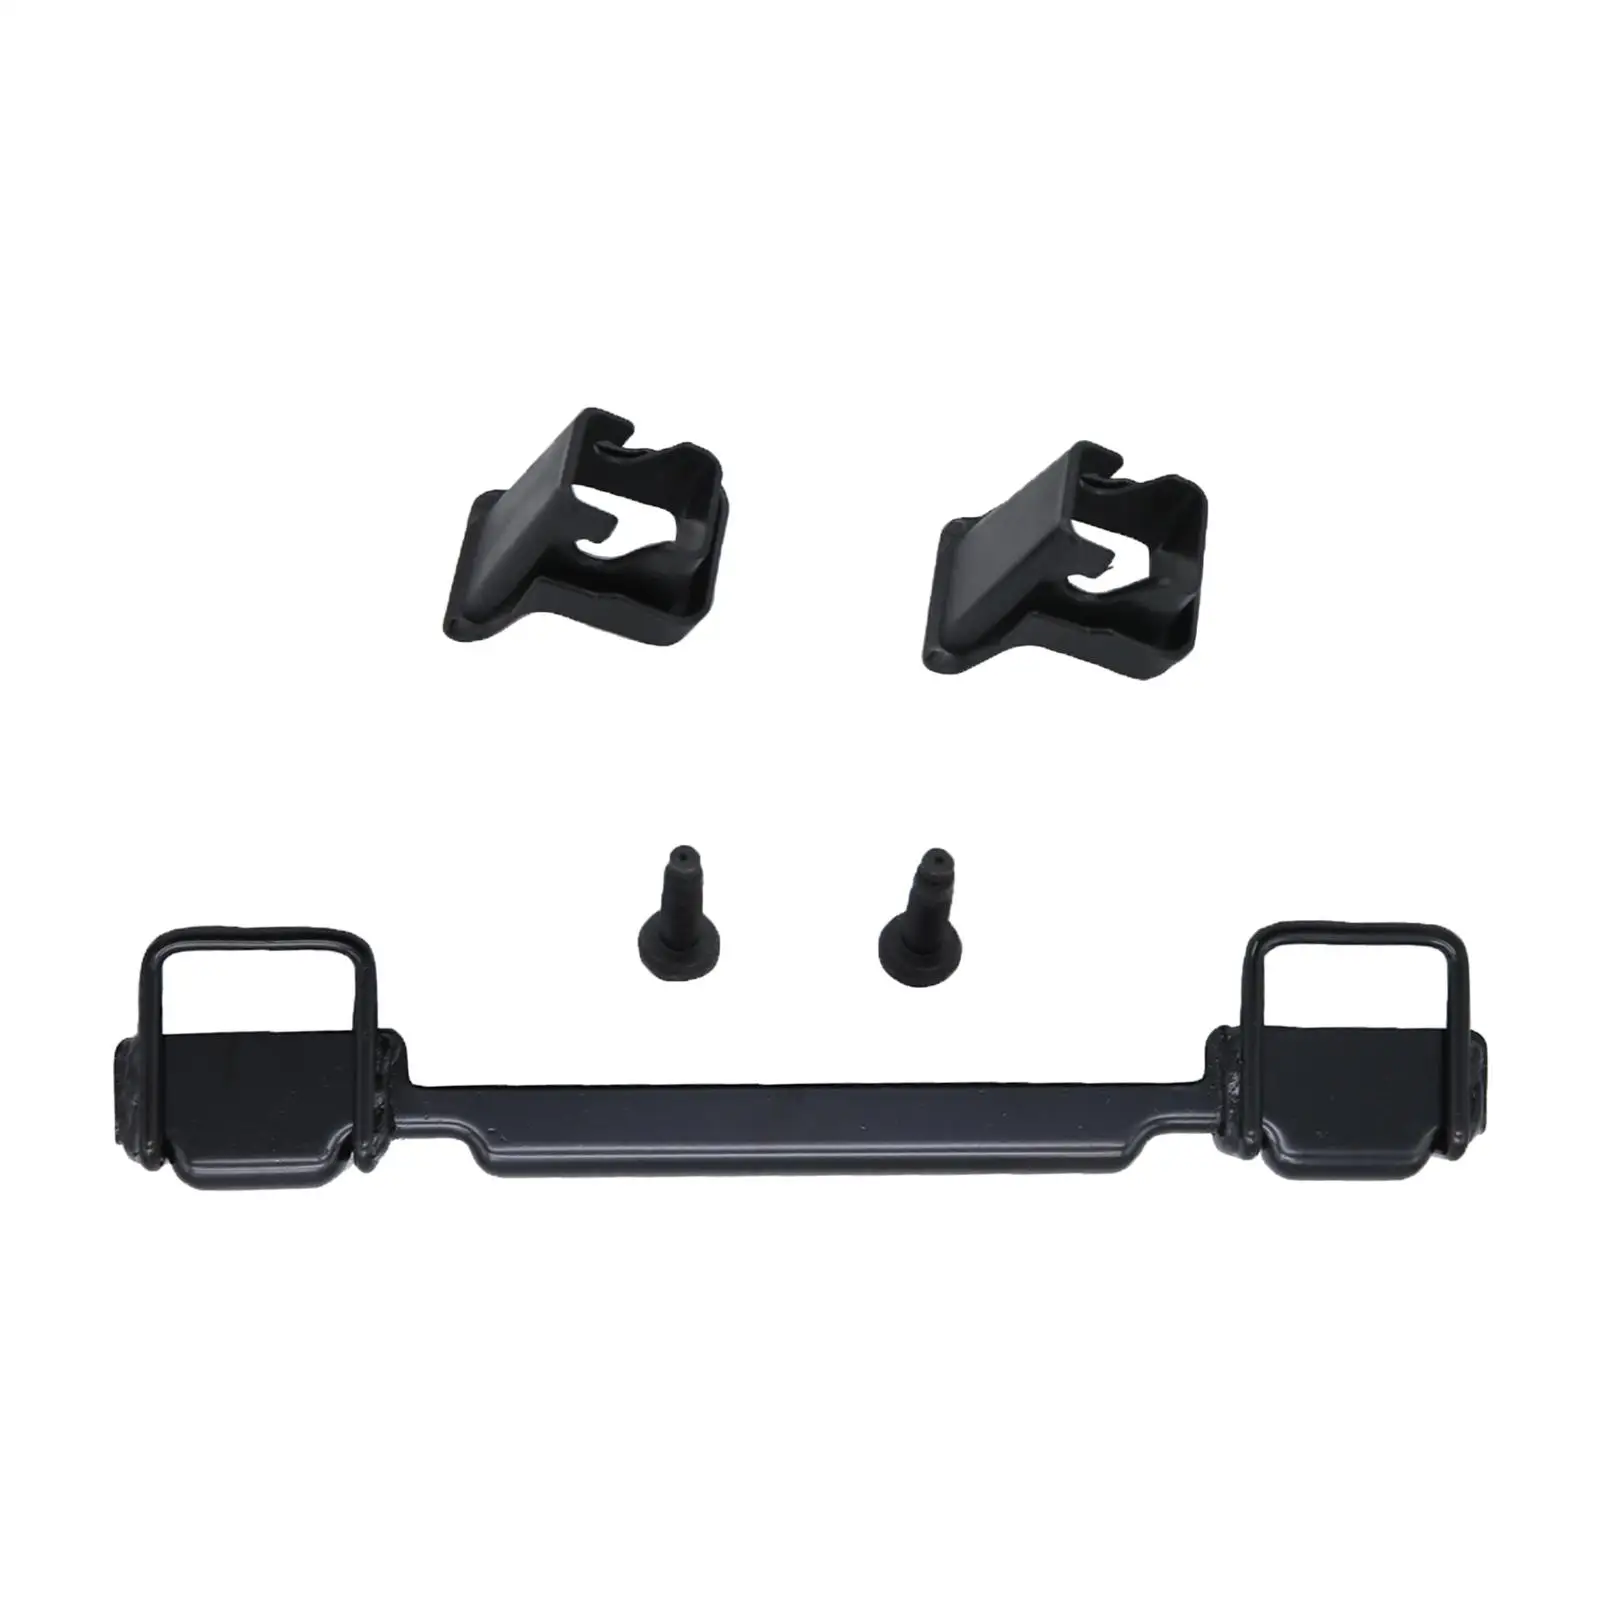 Auto Child Safety Seat Connector Good Replacement for Ford Focus Mk2 Restraint Anchor Interchange